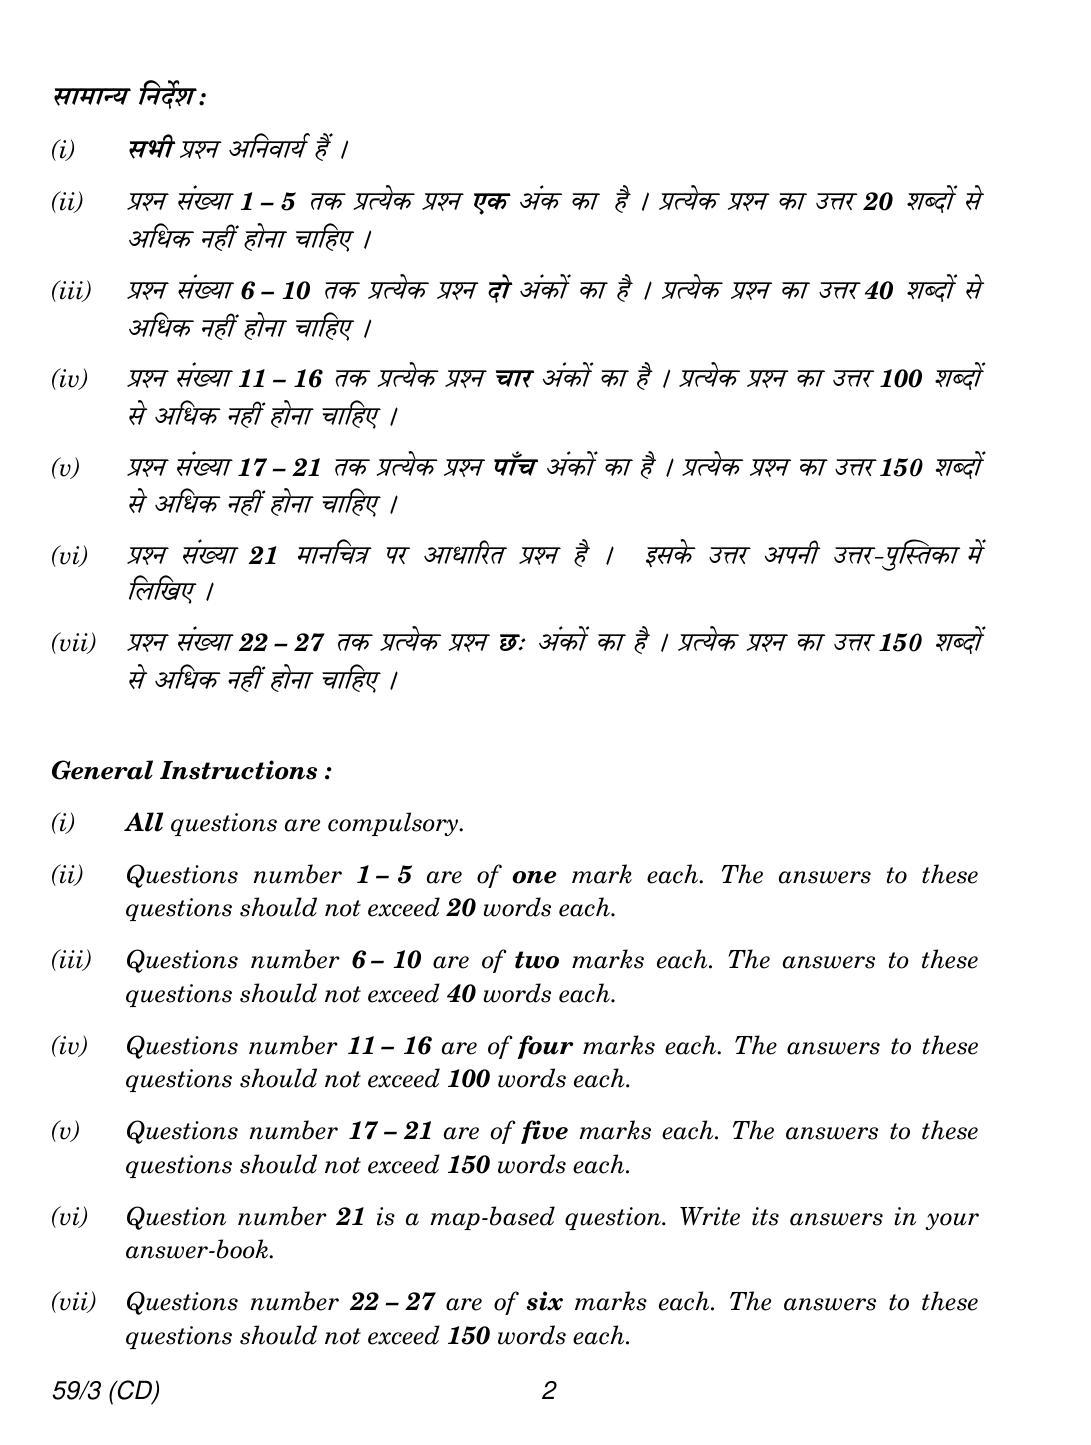 CBSE Class 12 59-3 POLITICAL SCIENCE CD 2018 Question Paper - Page 2